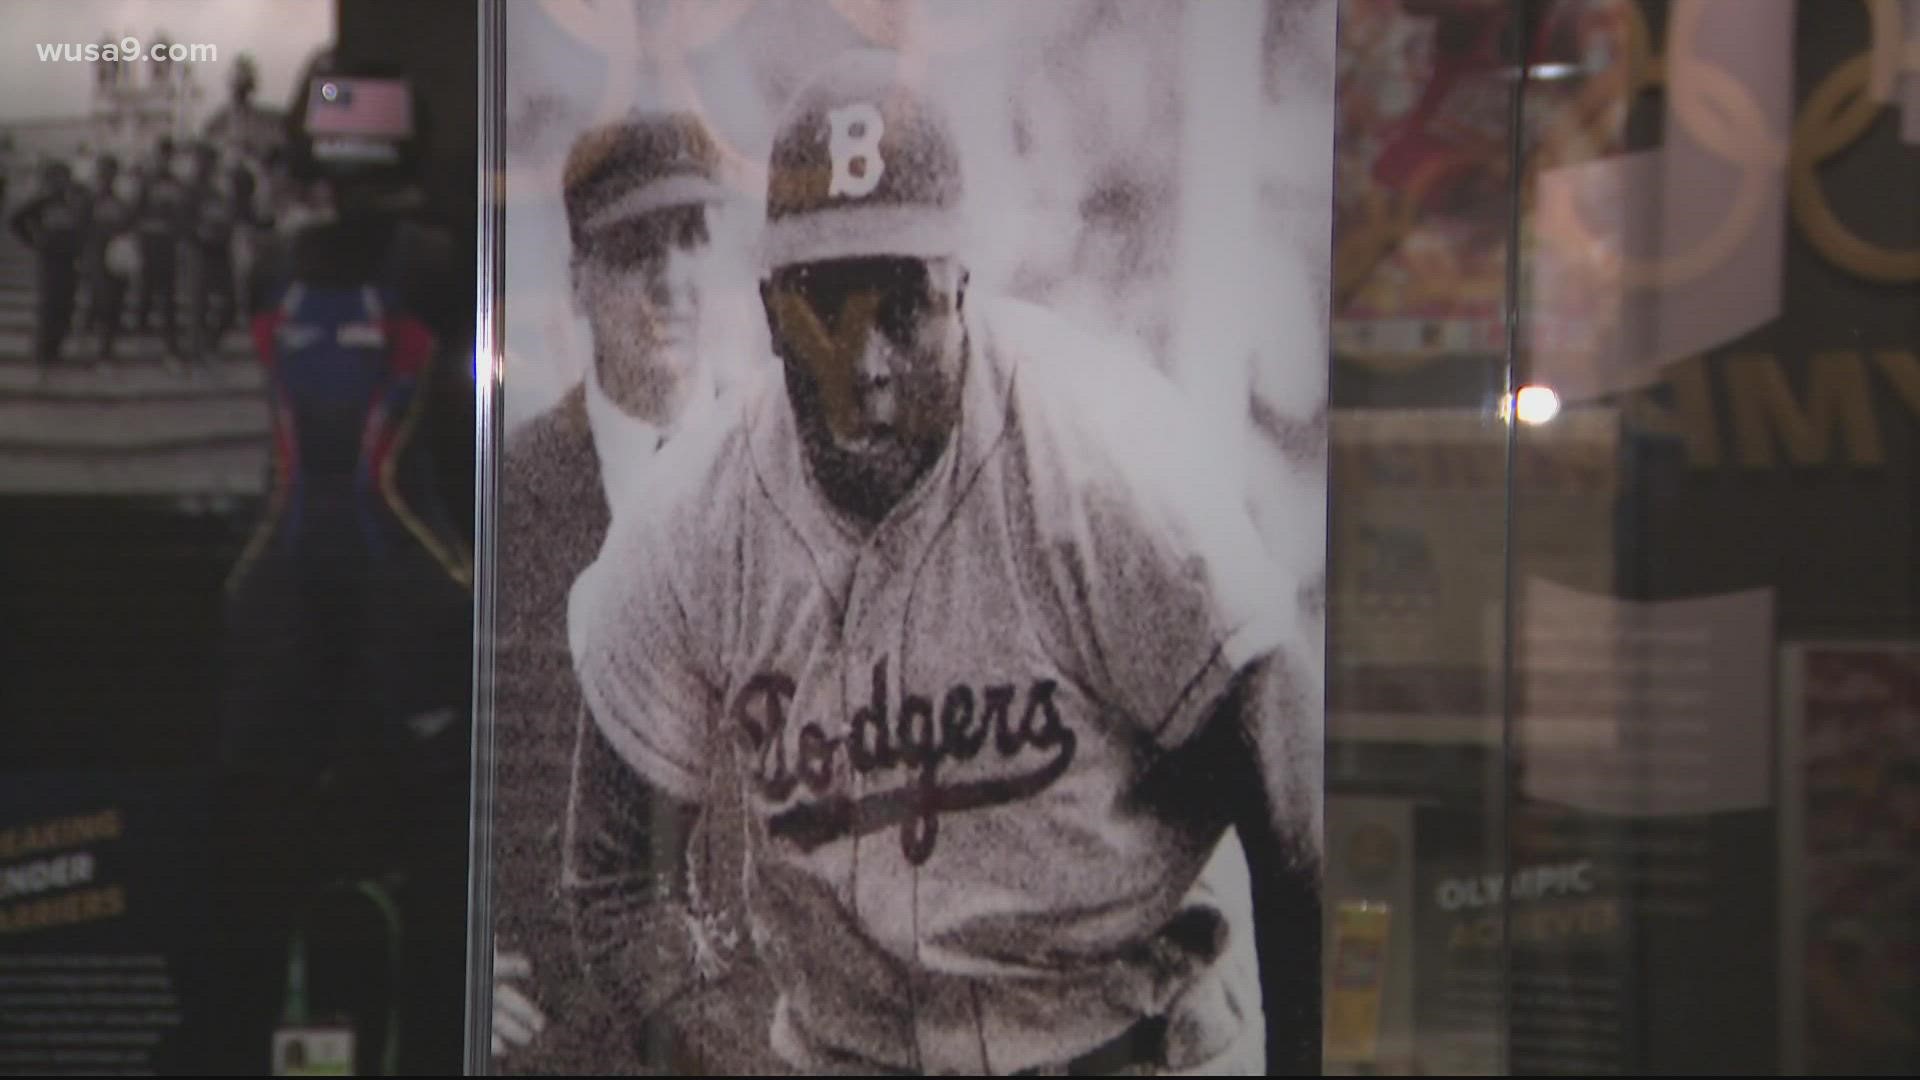 It's been 75 years since Major League Baseball was integrated and the museum in DC is celebrating Jackie Robinson by displaying his Brooklyn Dodger's jersey.